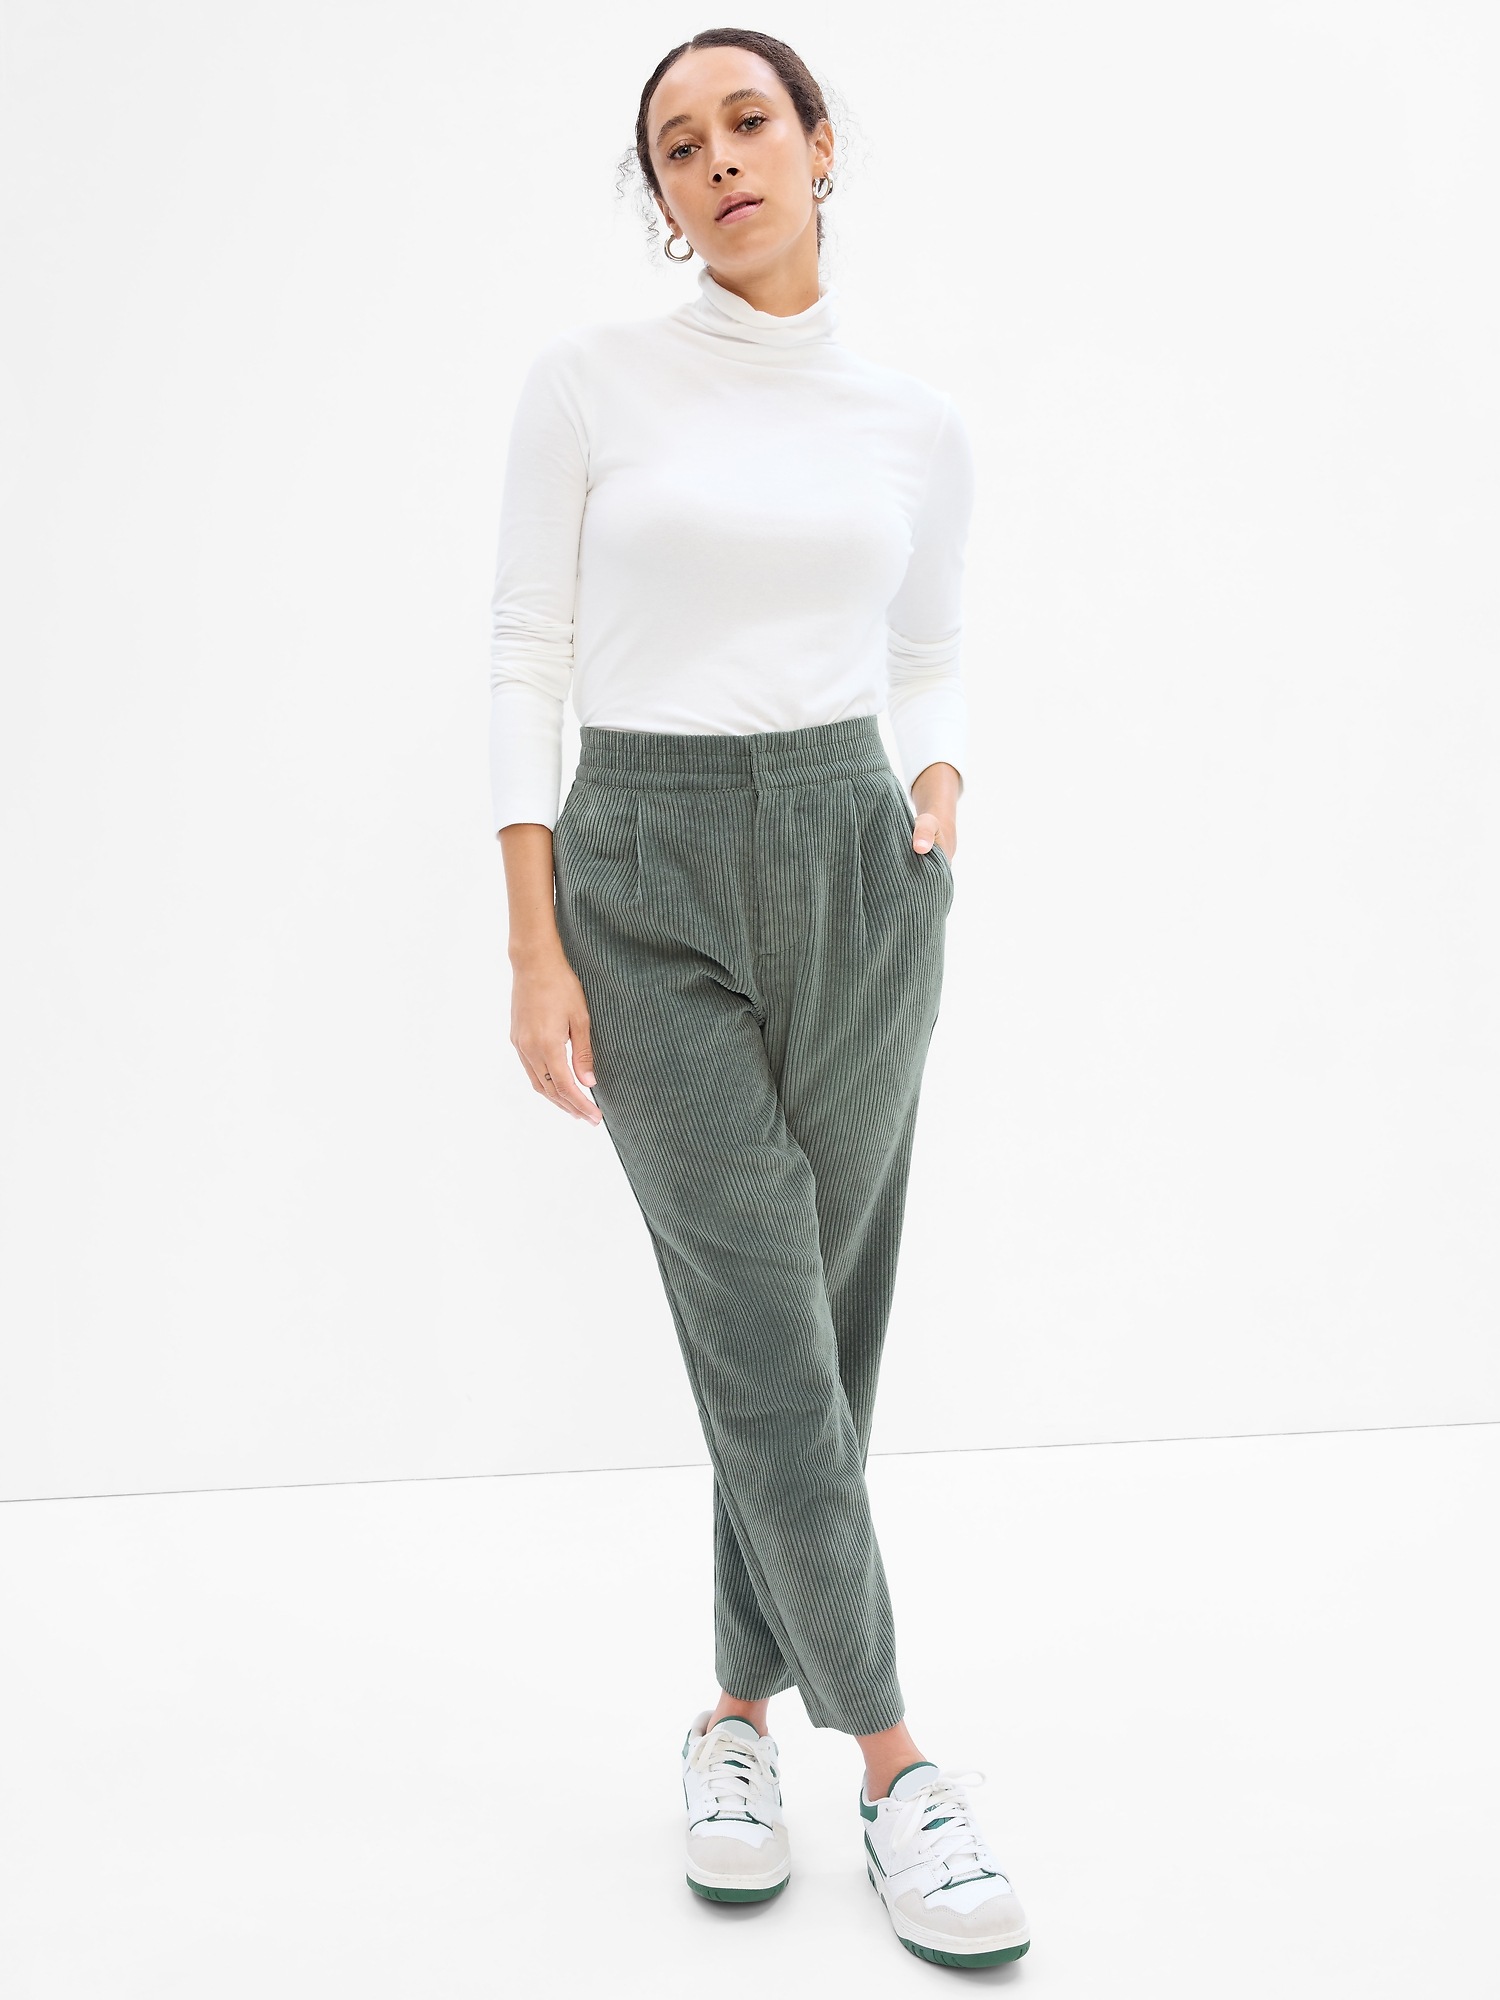 Cotton Corduroy Aritzia Effortless Pants Loose Fit Joggers For  Autumn/Winter Retro Fleeced Design Fashionable And Casual AZ54272620 201031  From Dou003, $29.9 | DHgate.Com